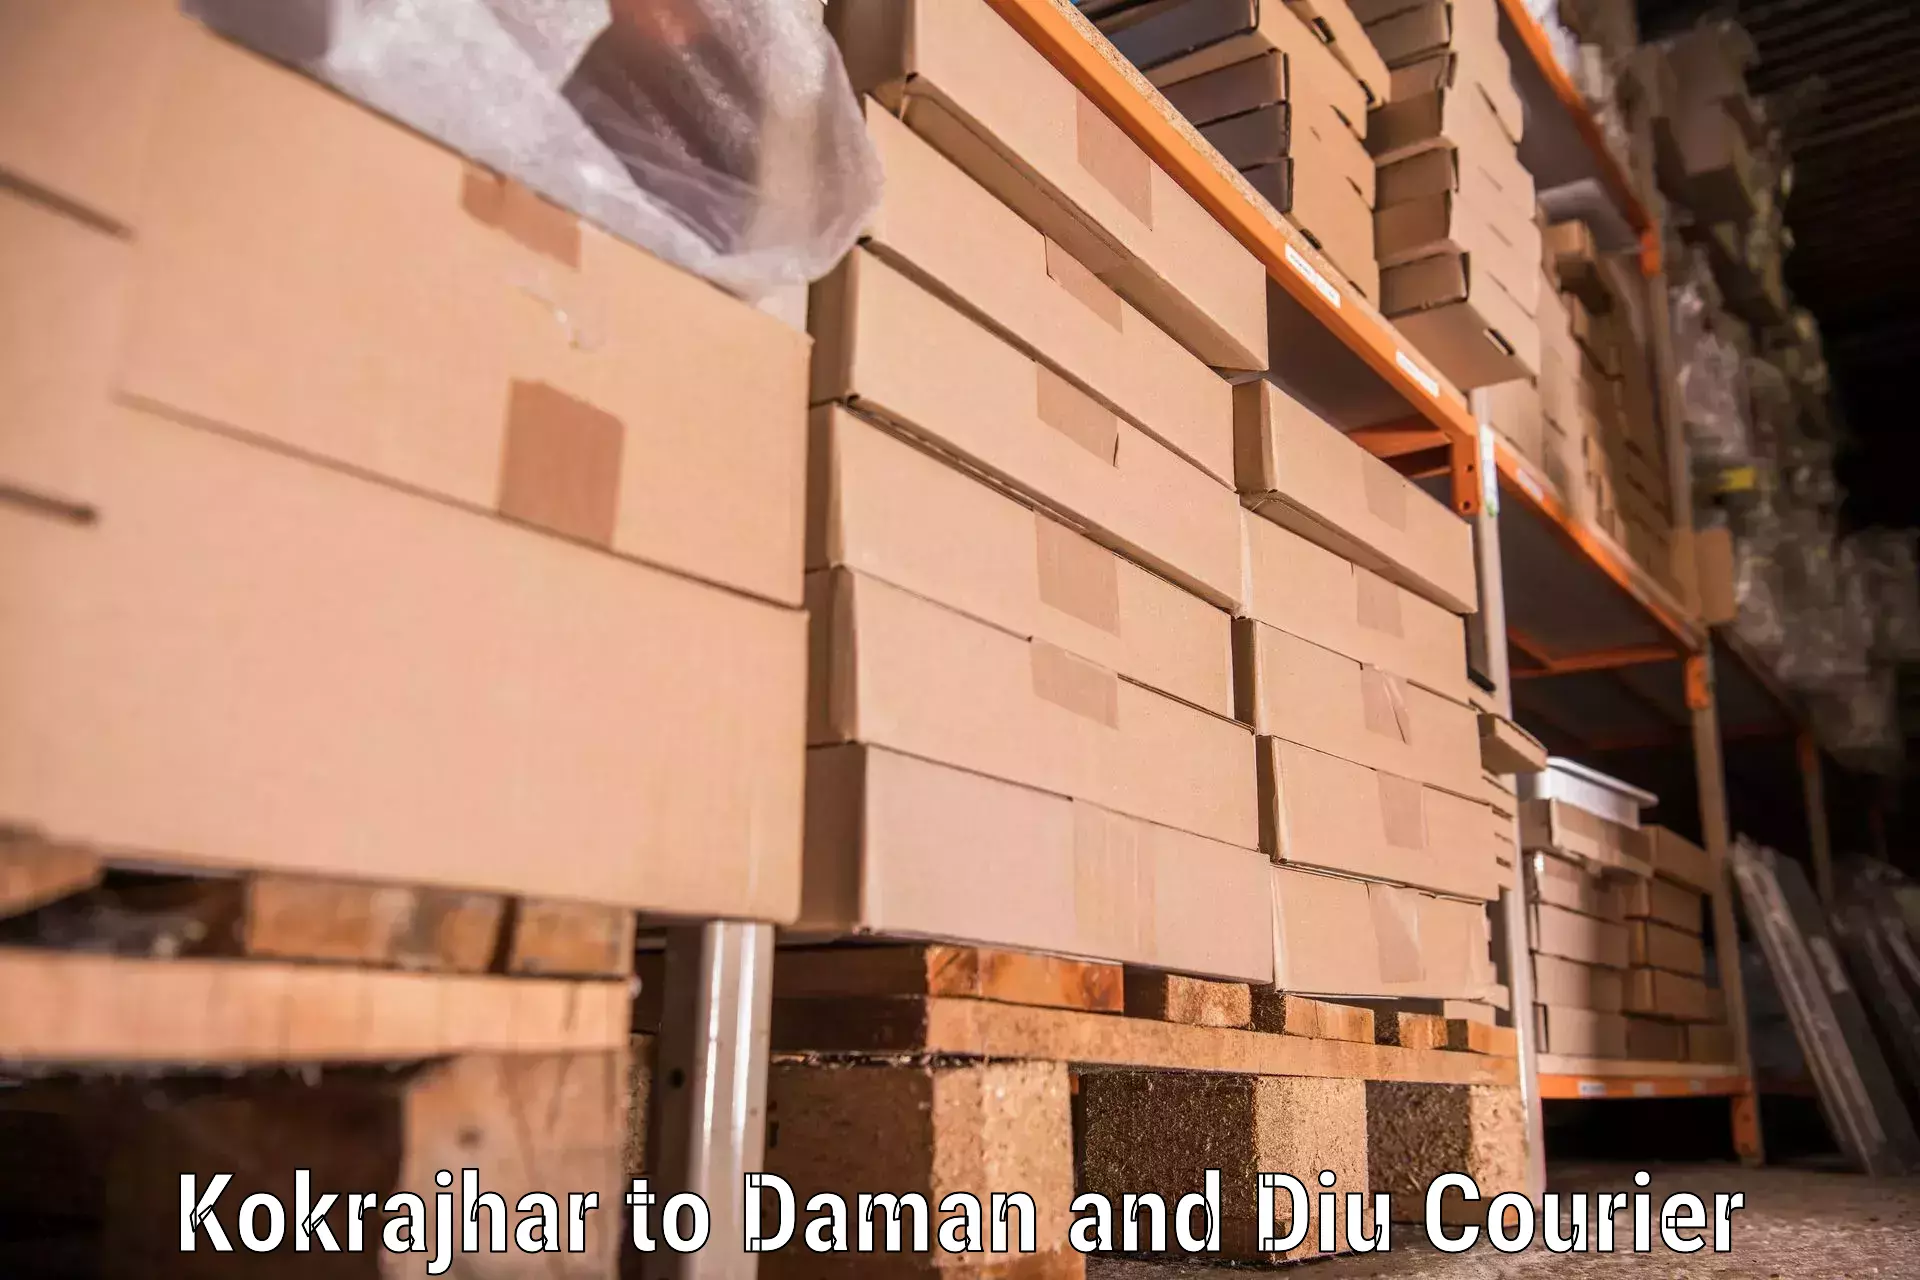 Moving and storage services Kokrajhar to Daman and Diu